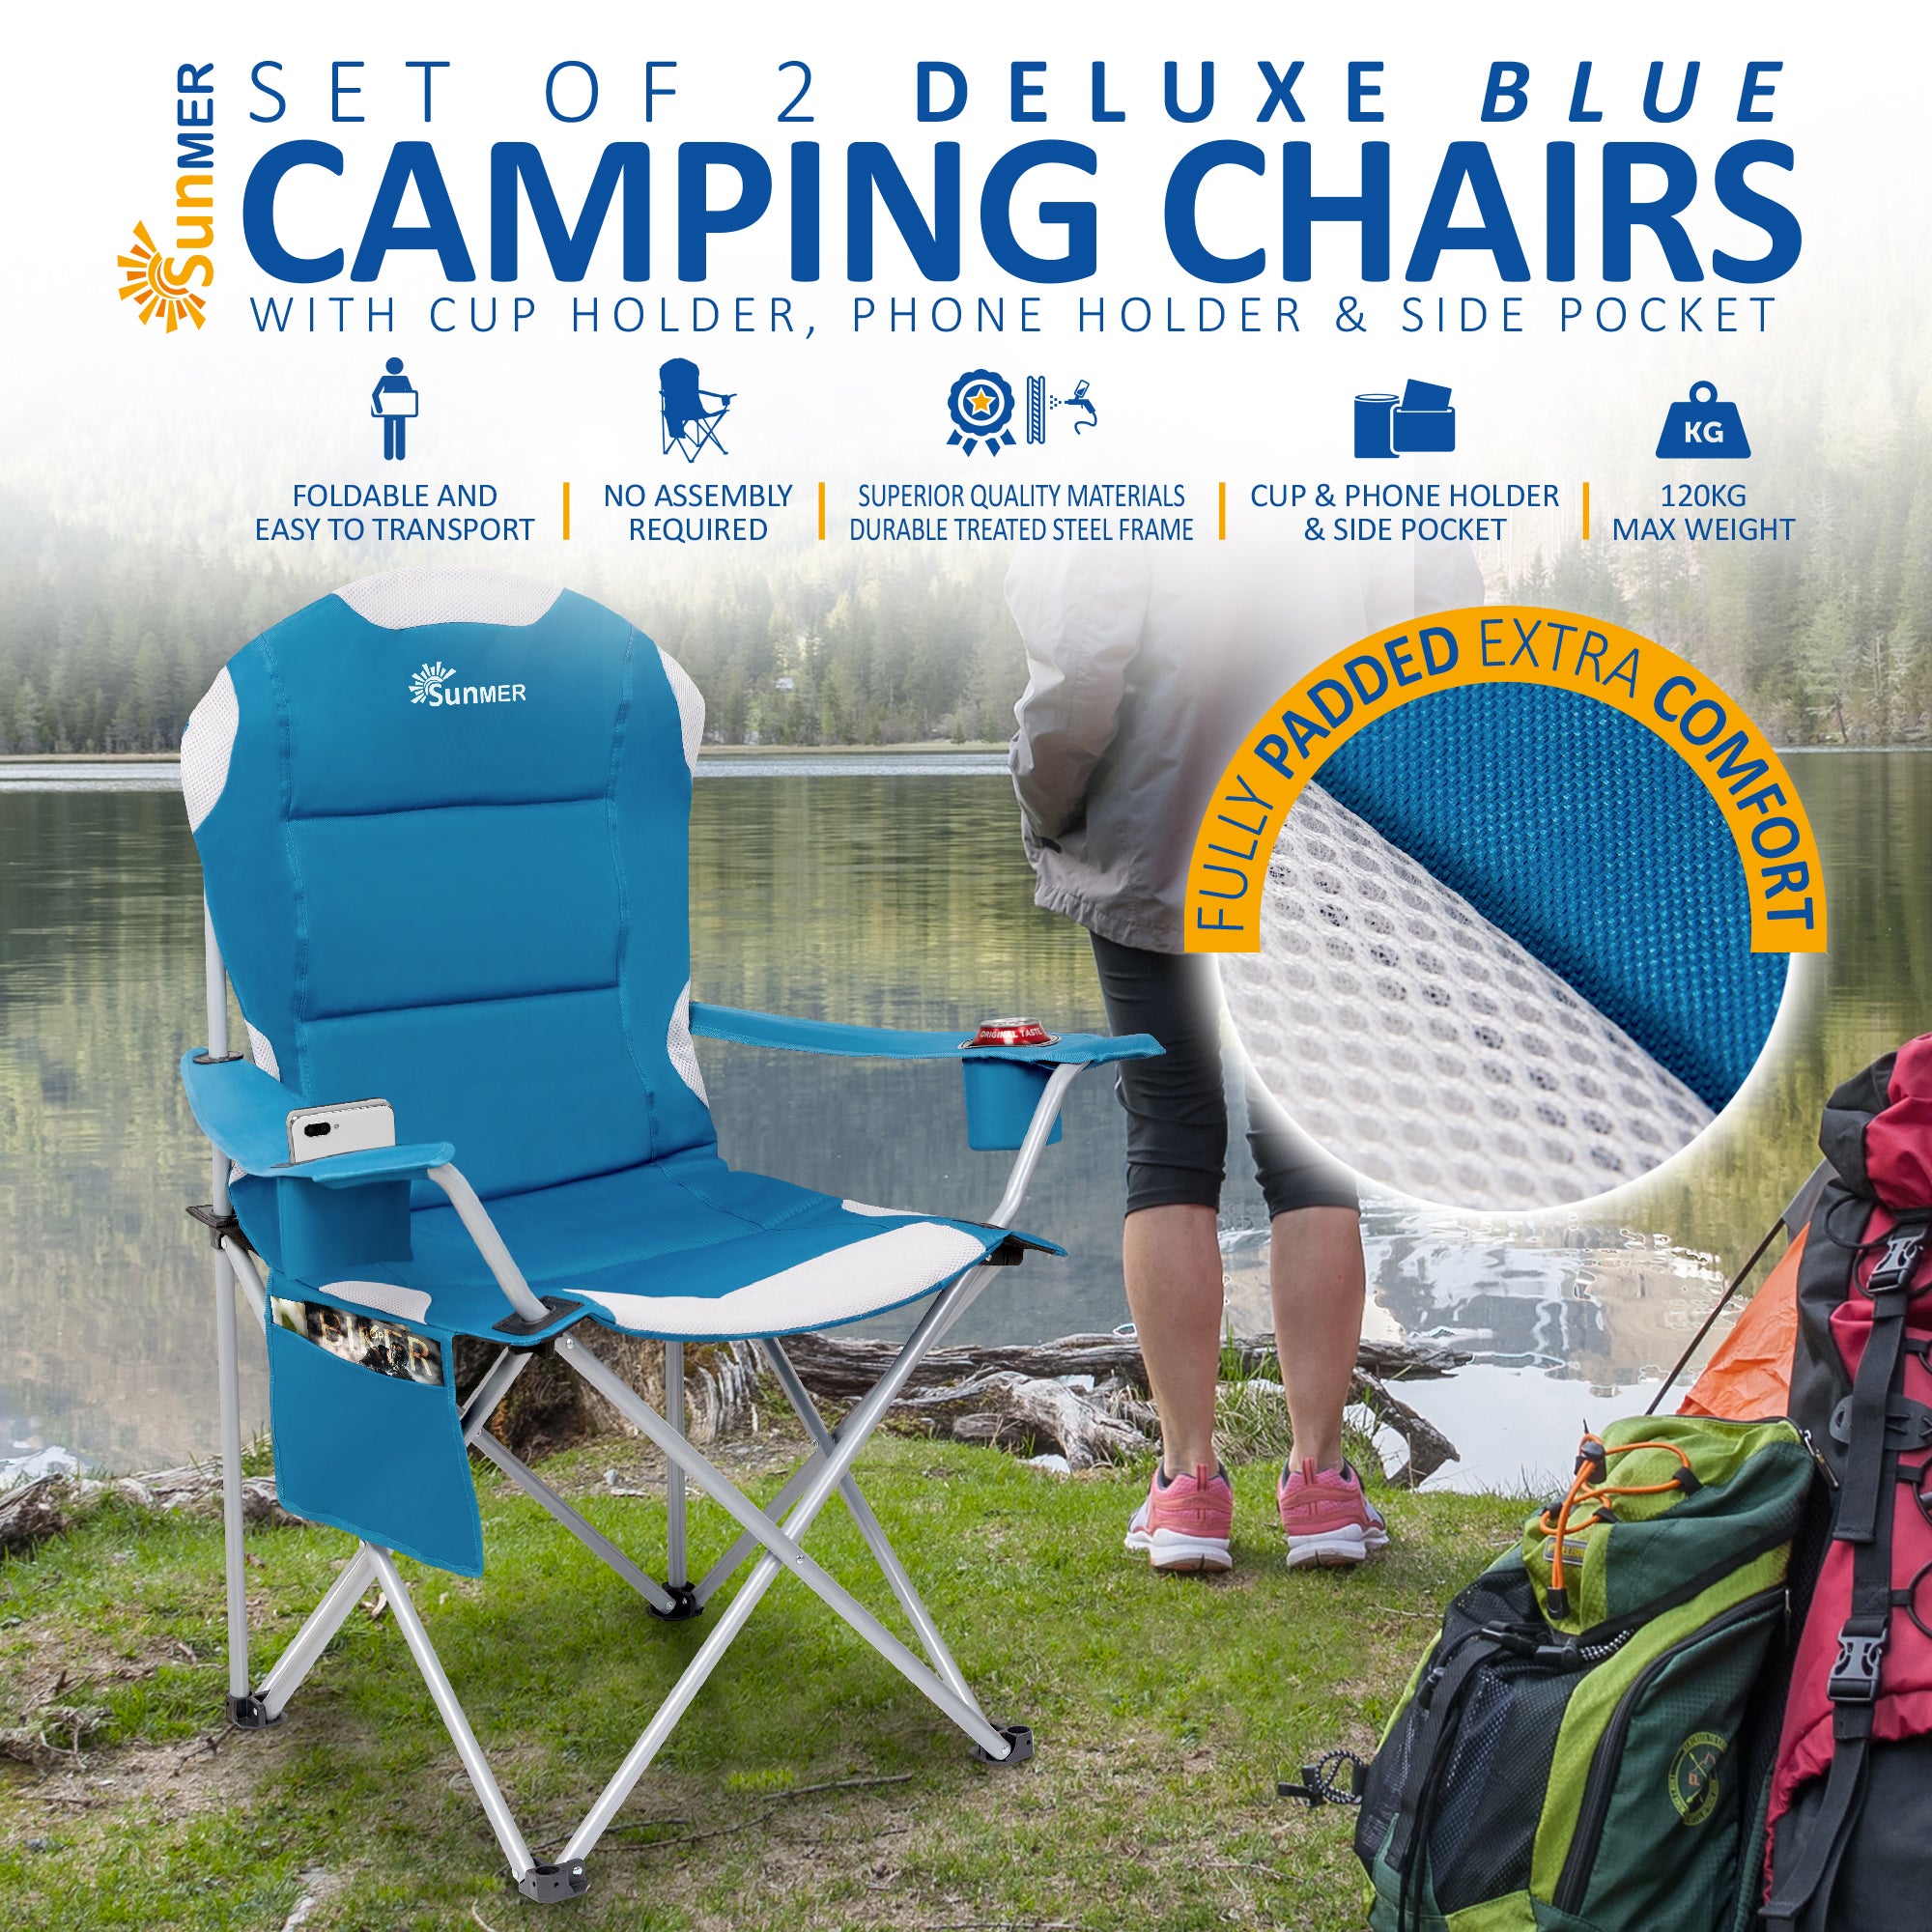 SUNMER Folding Padded Camping Chairs - Set of 2 - Blue